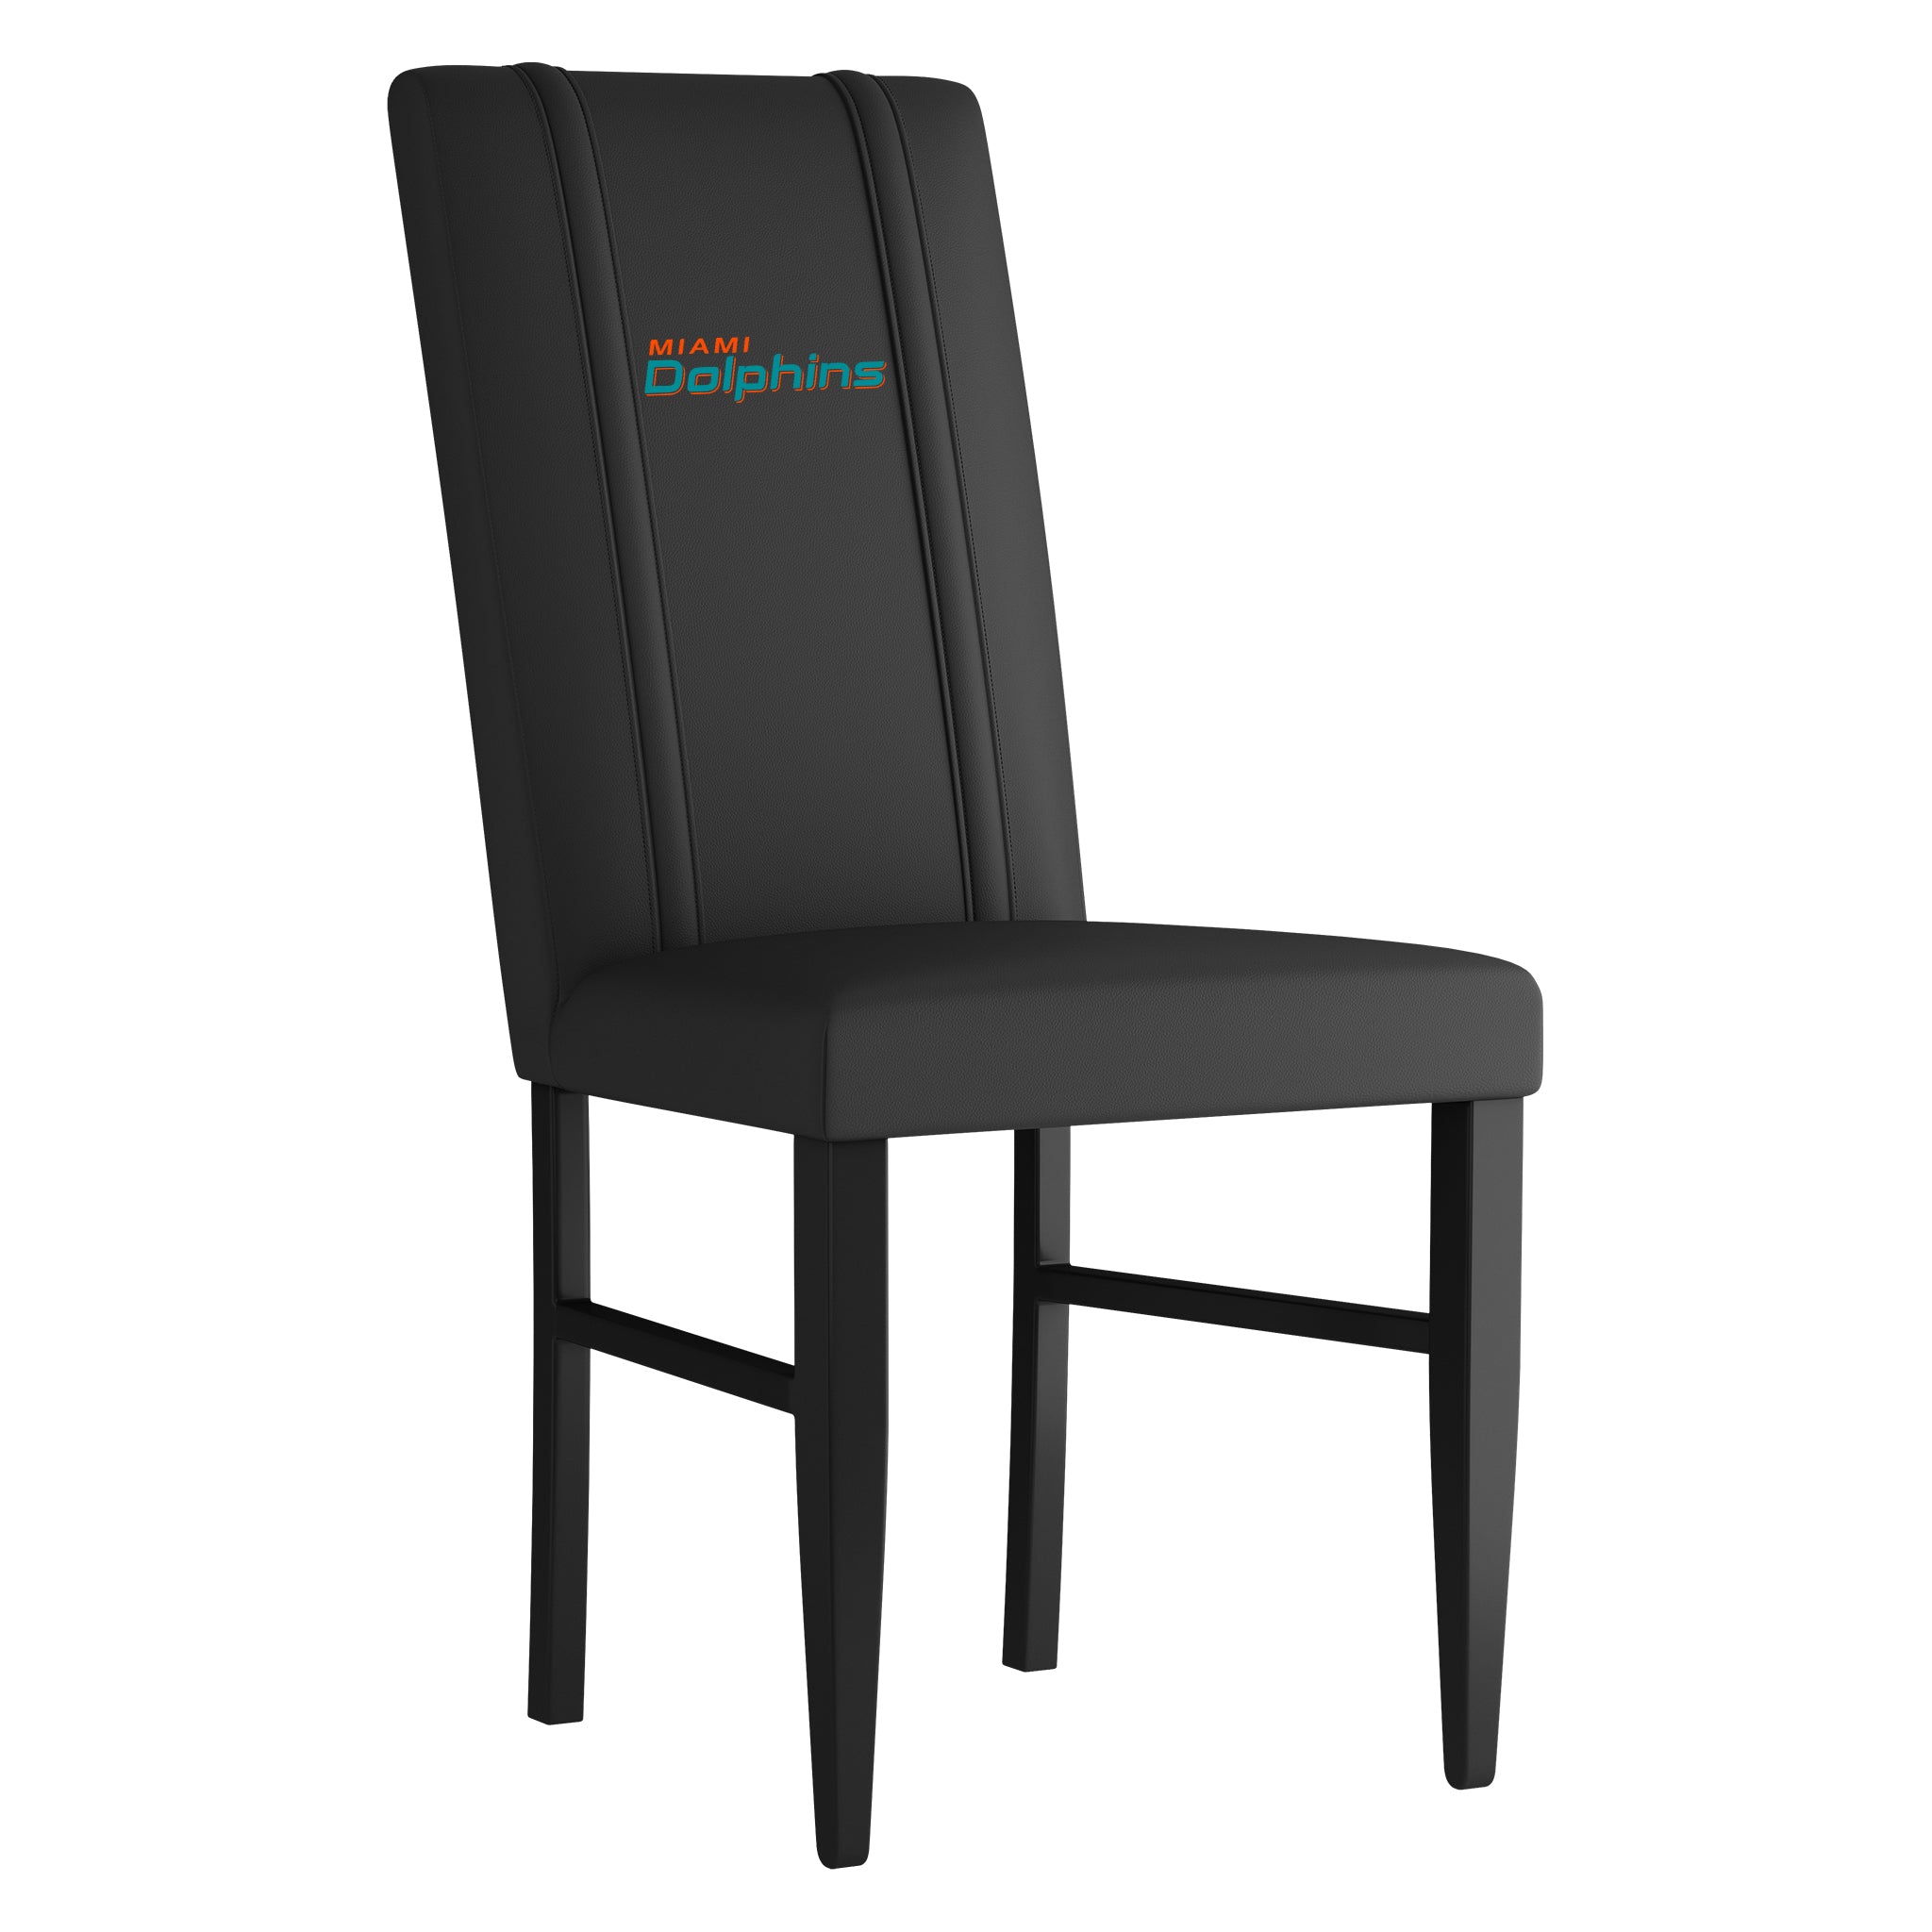 Miami Dolphins Side Chair 2000